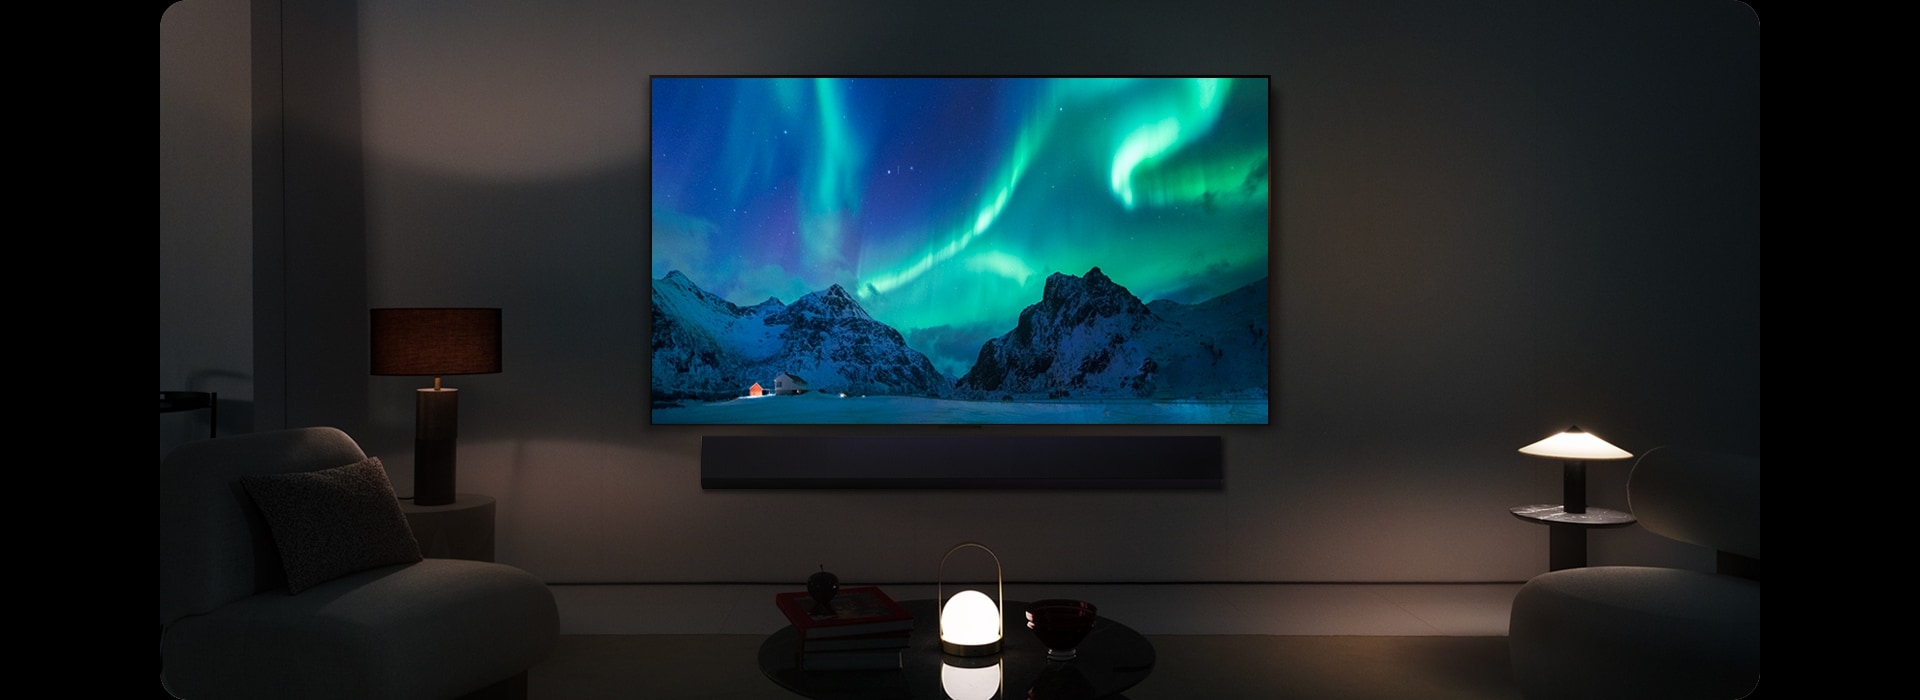 An image of an LG OLED TV and LG Soundbar in a modern living space in nighttime. The image of the aurora borealis is displayed with the ideal brightness levels.	